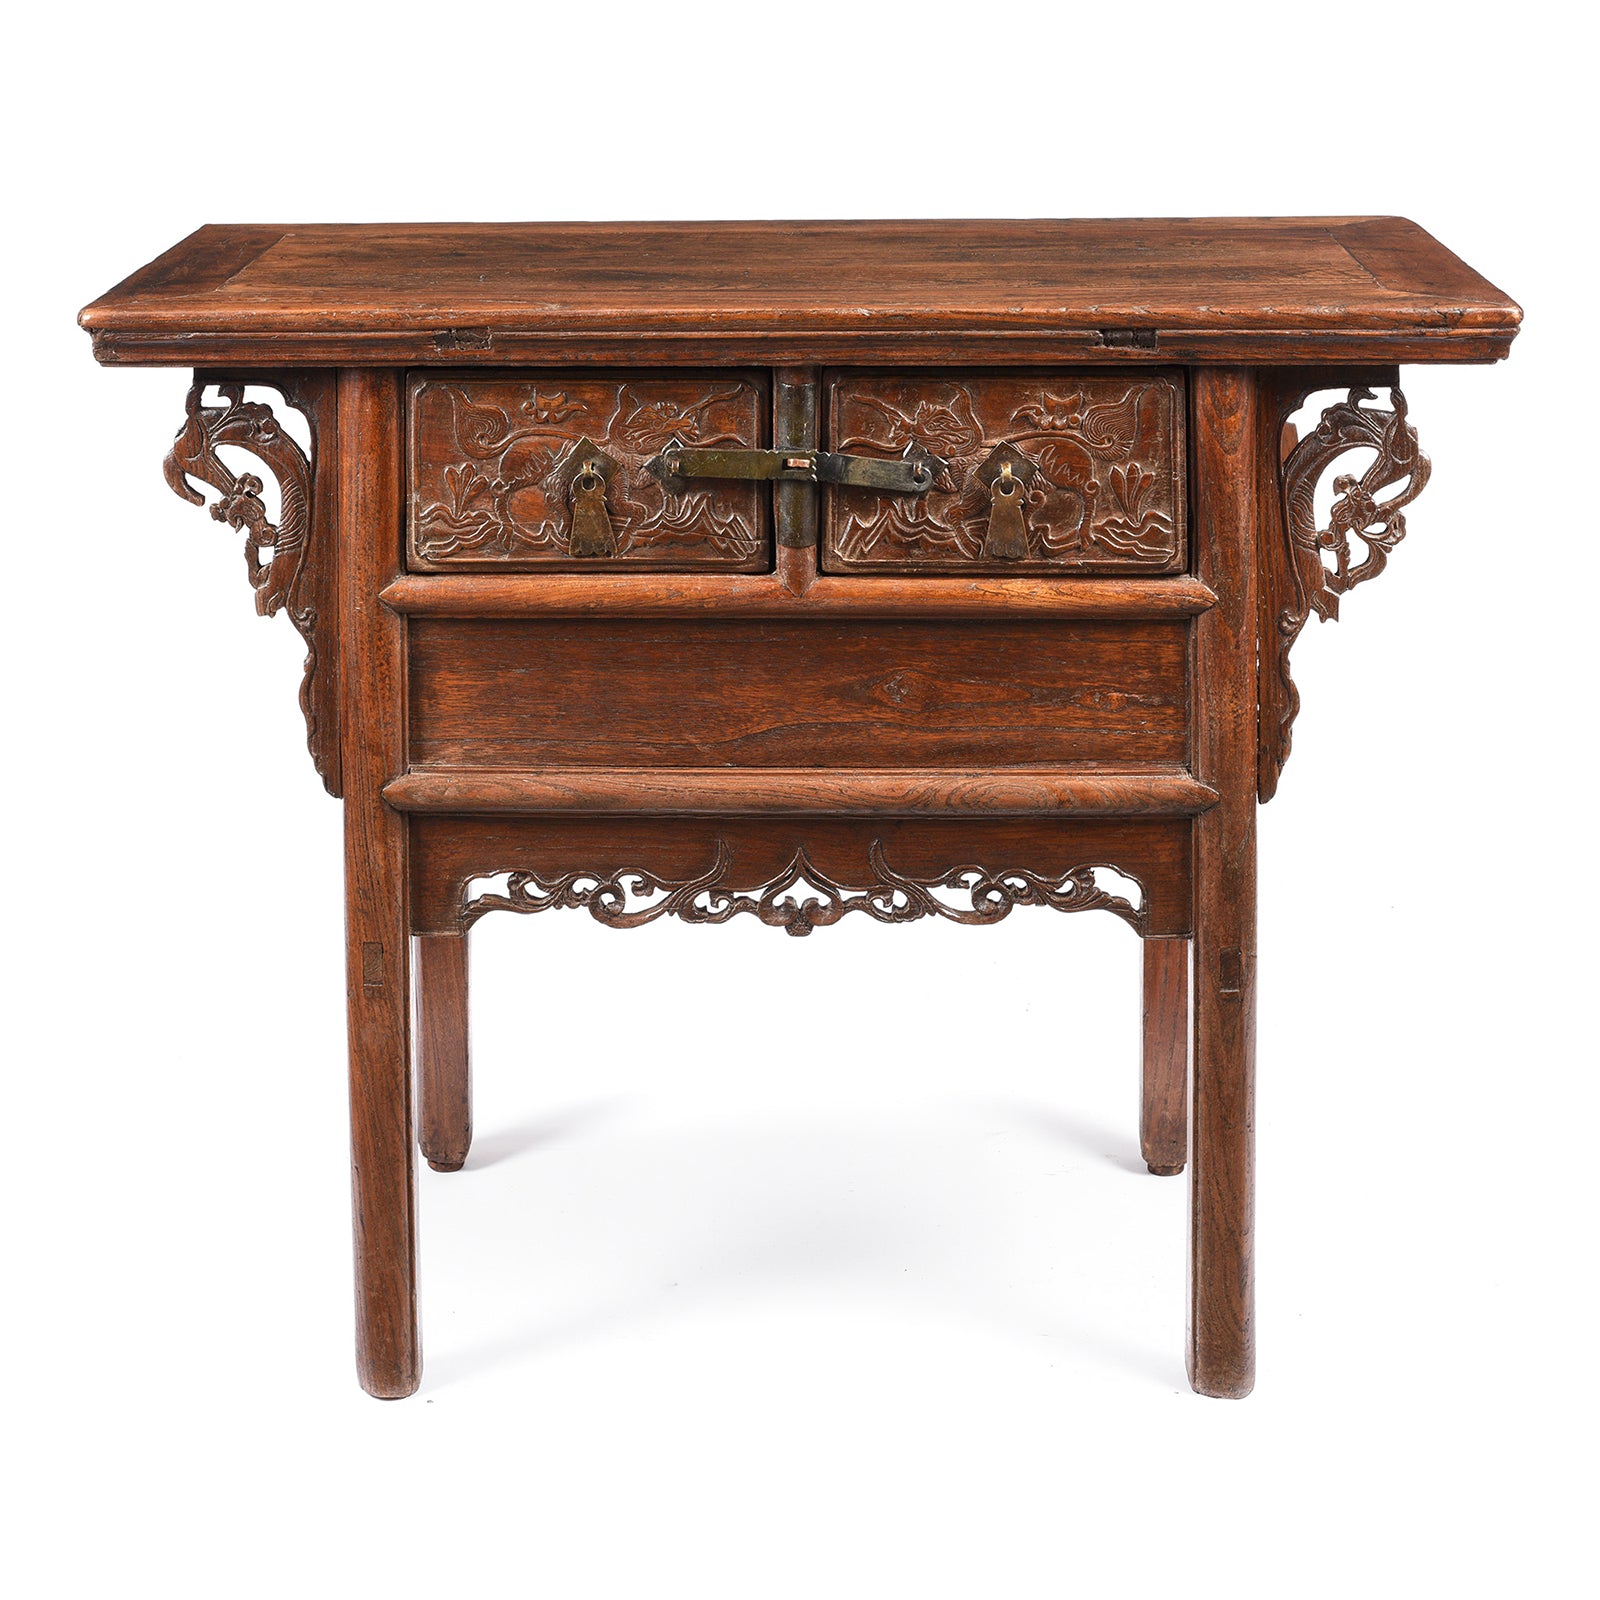 Antique Carved Elm & Pawlownia Wine Table From Shanxi - Late 19th Century